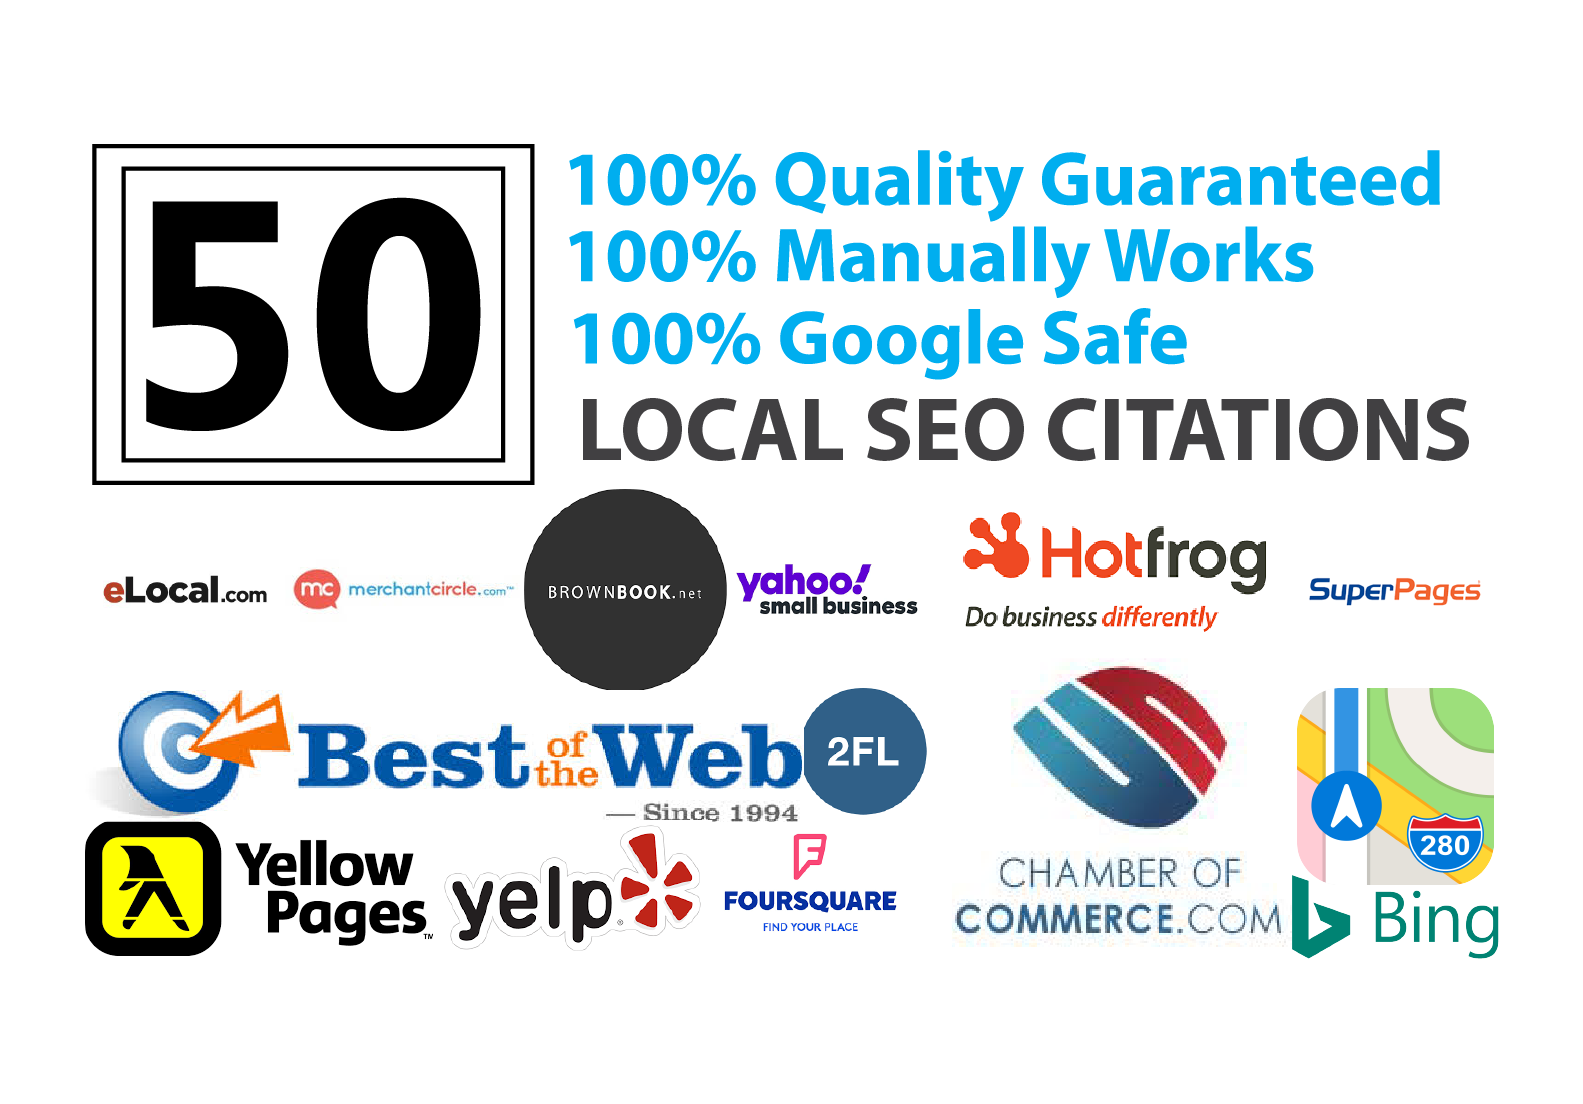 Top 50 Local SEO Citations From Brightlocal, Yext, Moz, Whitespark For Google 1st Page Rankings